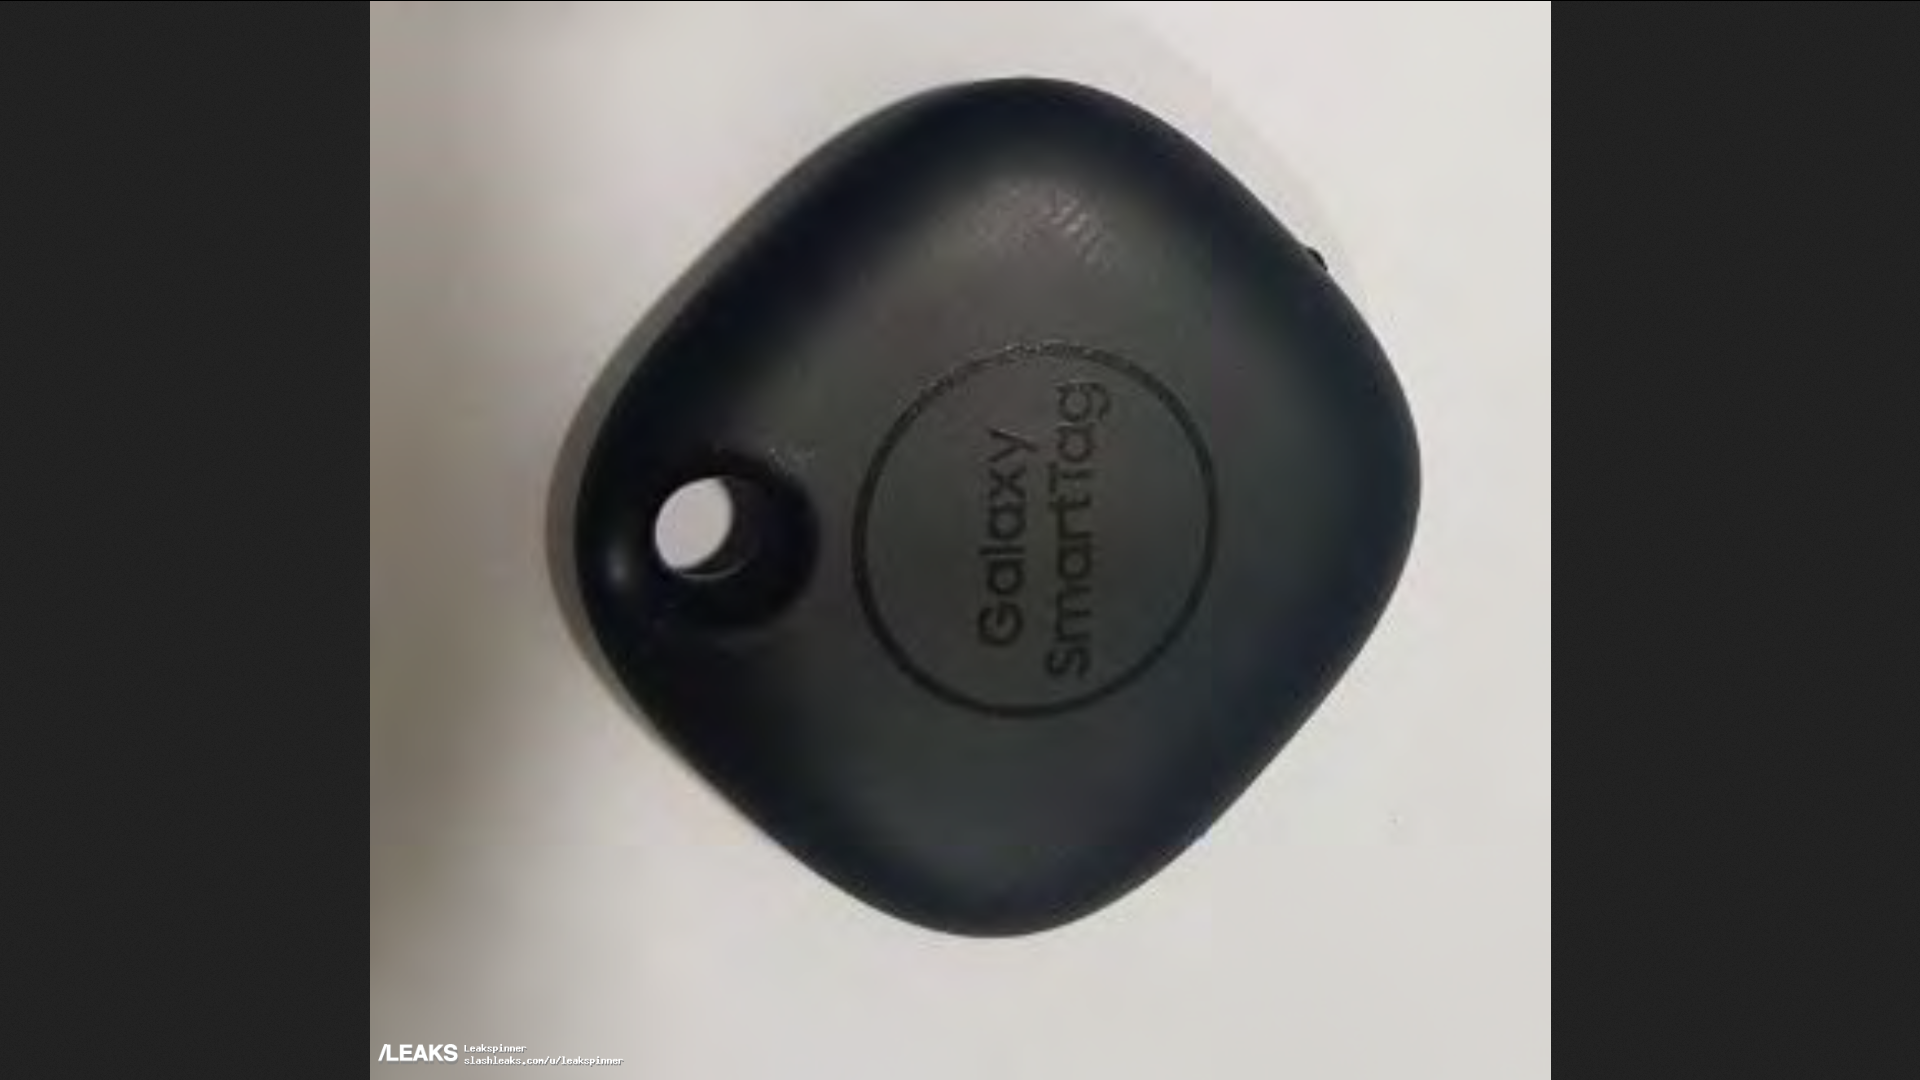 Samsung Galaxy S21 may have this 'SmartTag' Bluetooth tracker tag